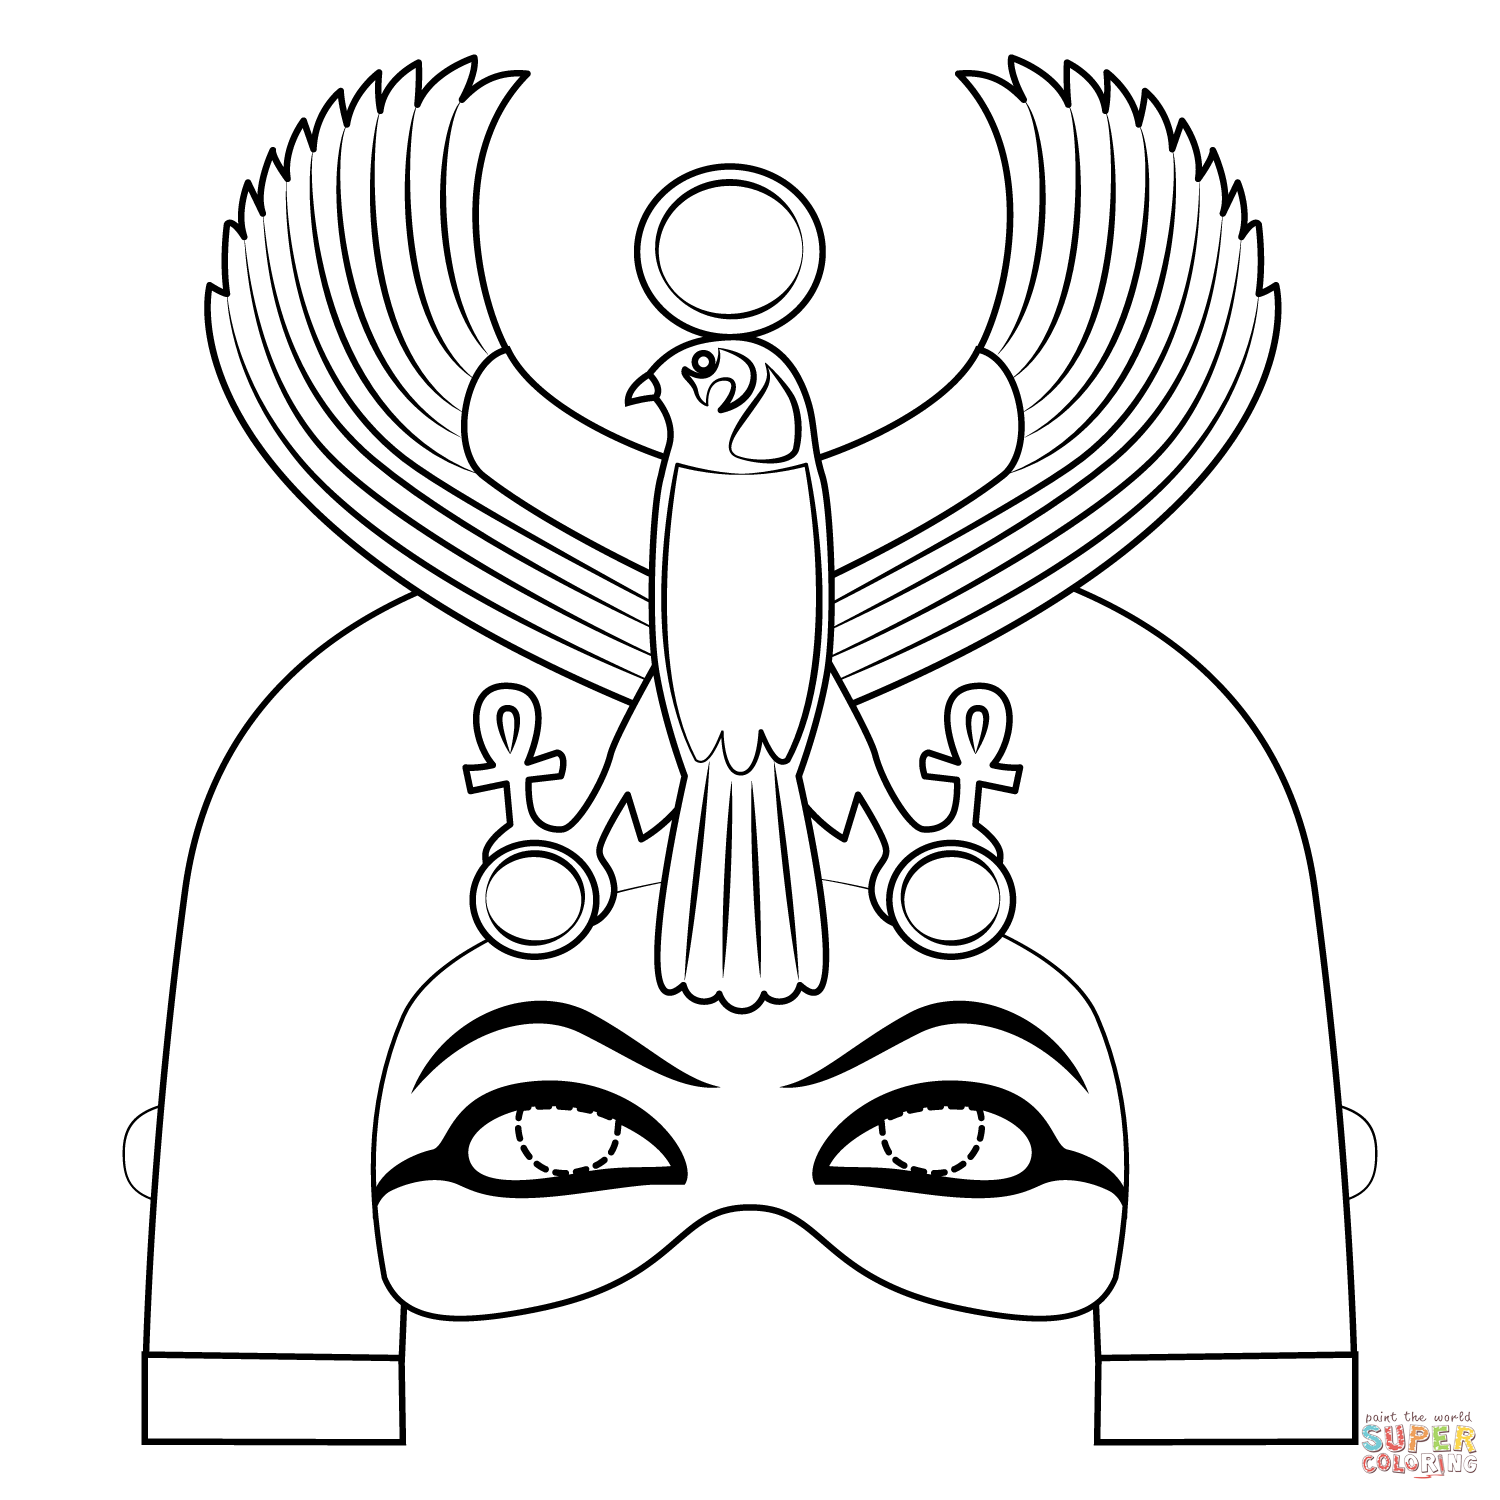 Egyptian mask with horus falcon coloring page free printable coloring pages egyptian mask egyptian crafts coloring pages